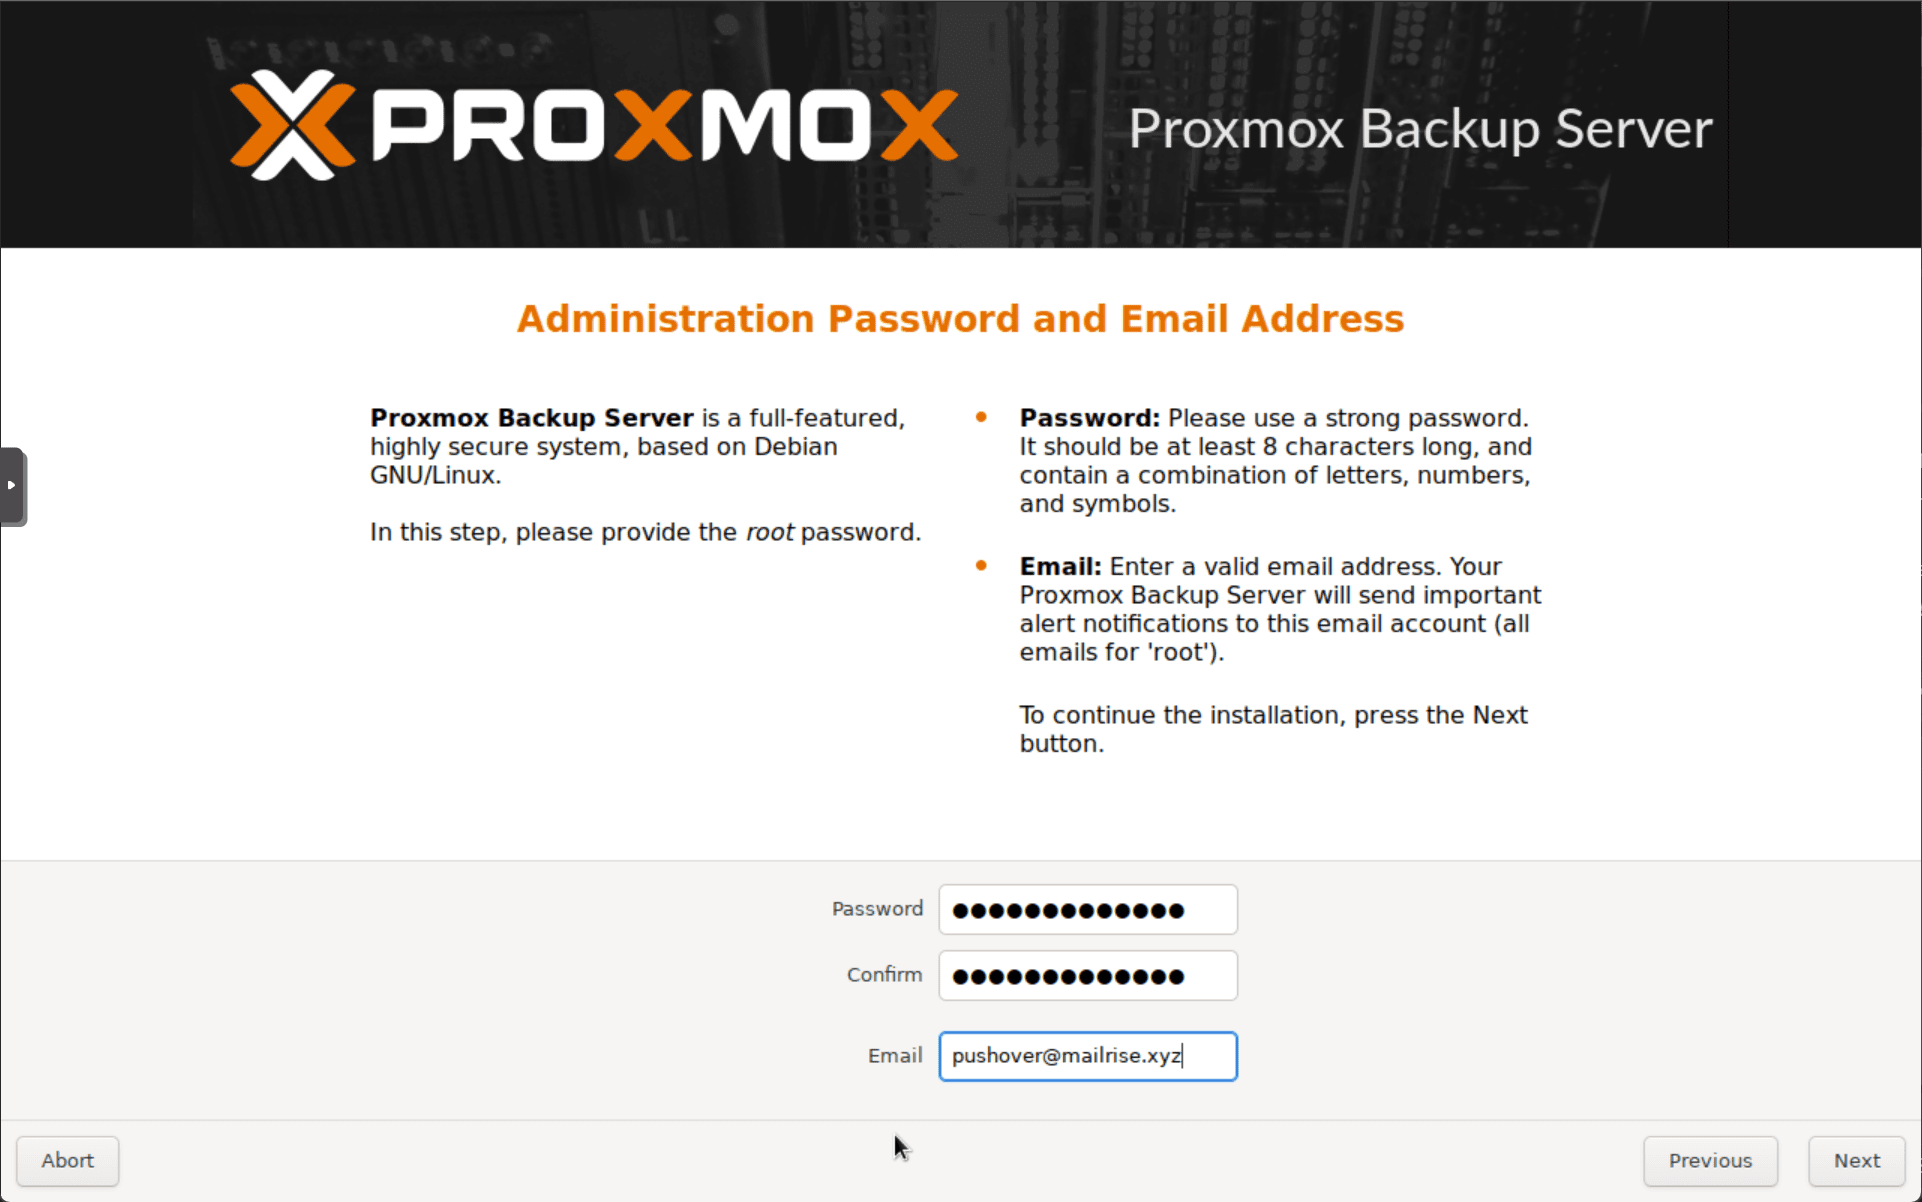 Setting the password and email address